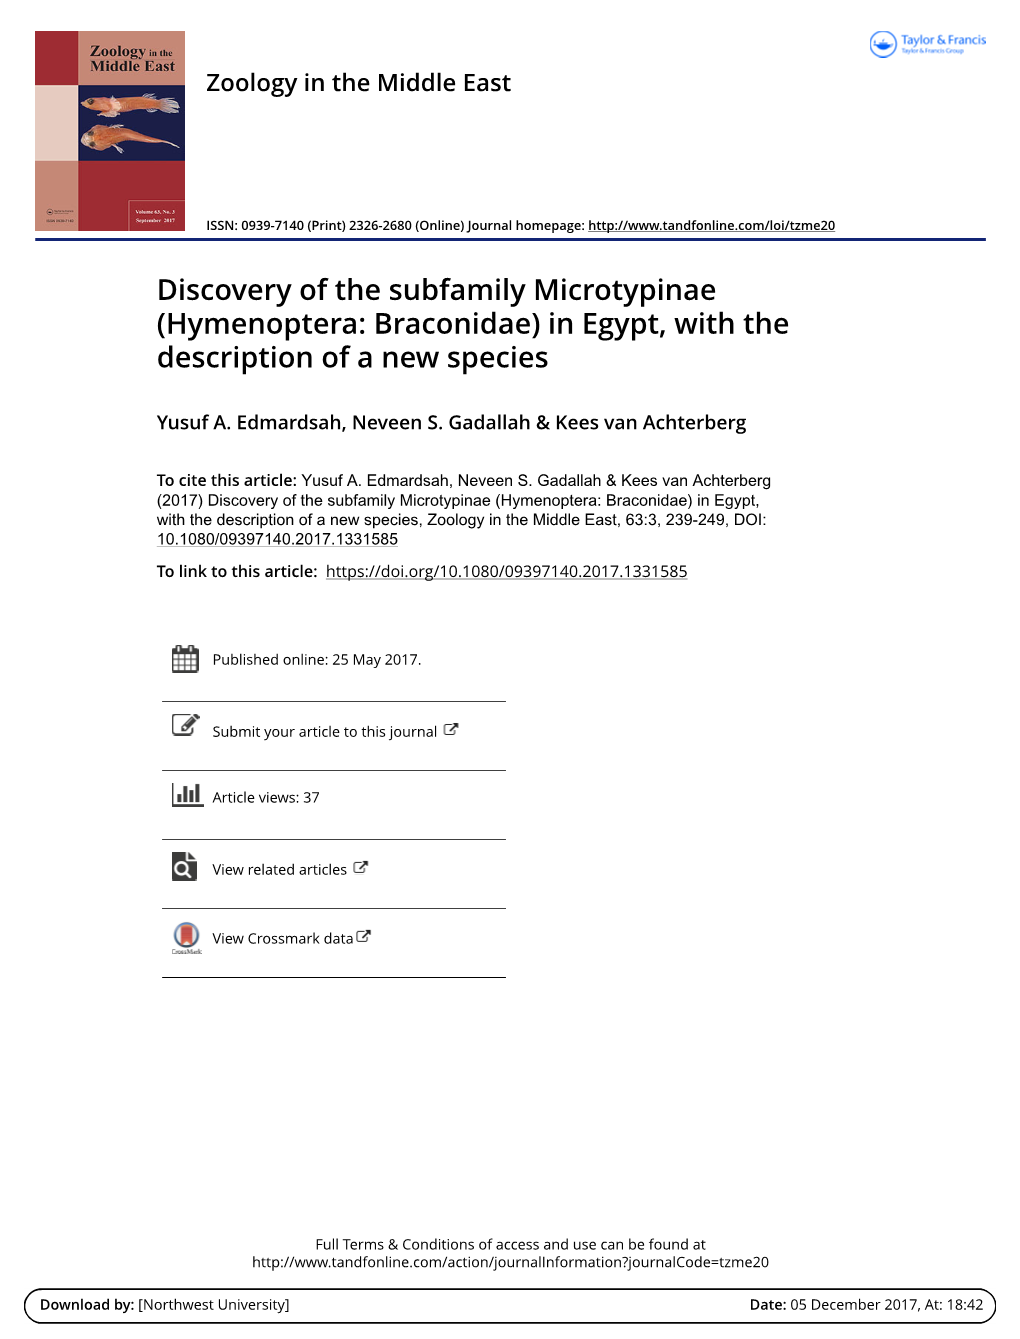 (Hymenoptera: Braconidae) in Egypt, with the Description of a New Species